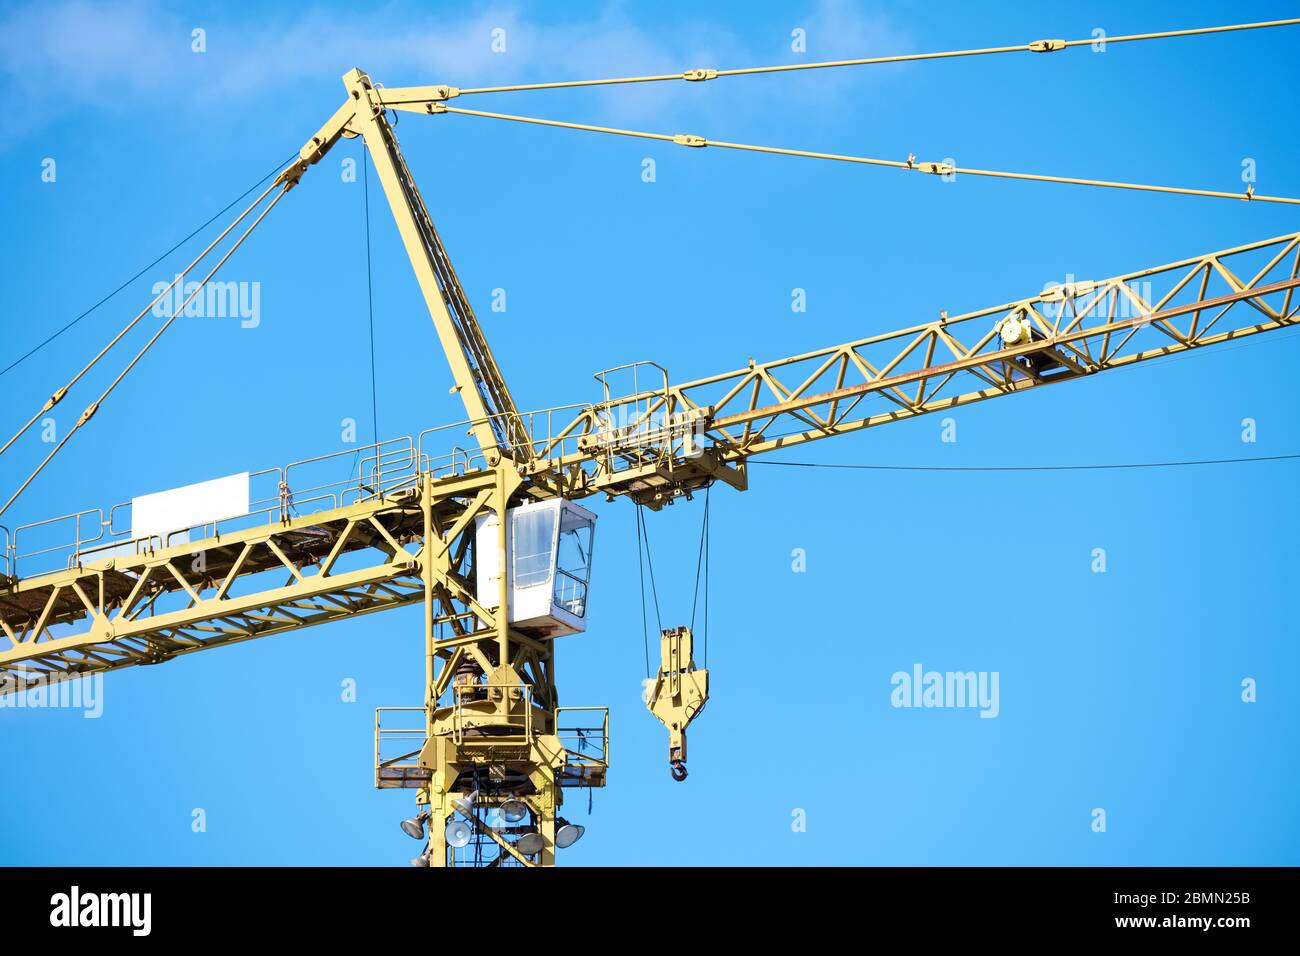 Tower crane high in blue sky close up of lifting hook Stock Photo